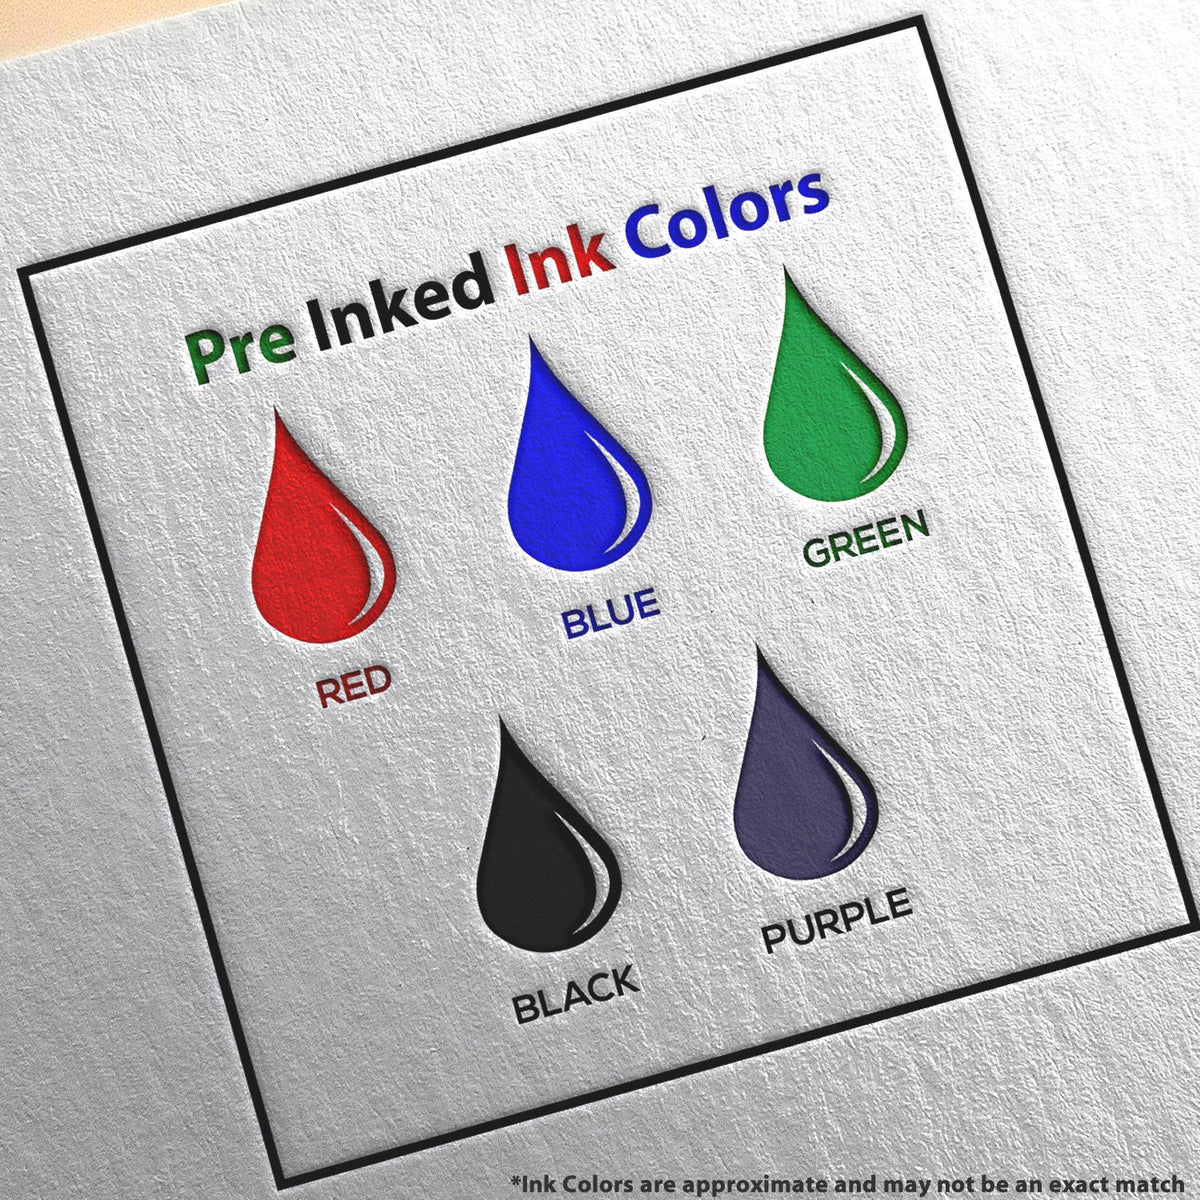 A picture showing the different ink colors or hues available for the Slim Pre-Inked Rhode Island Architect Seal Stamp product.